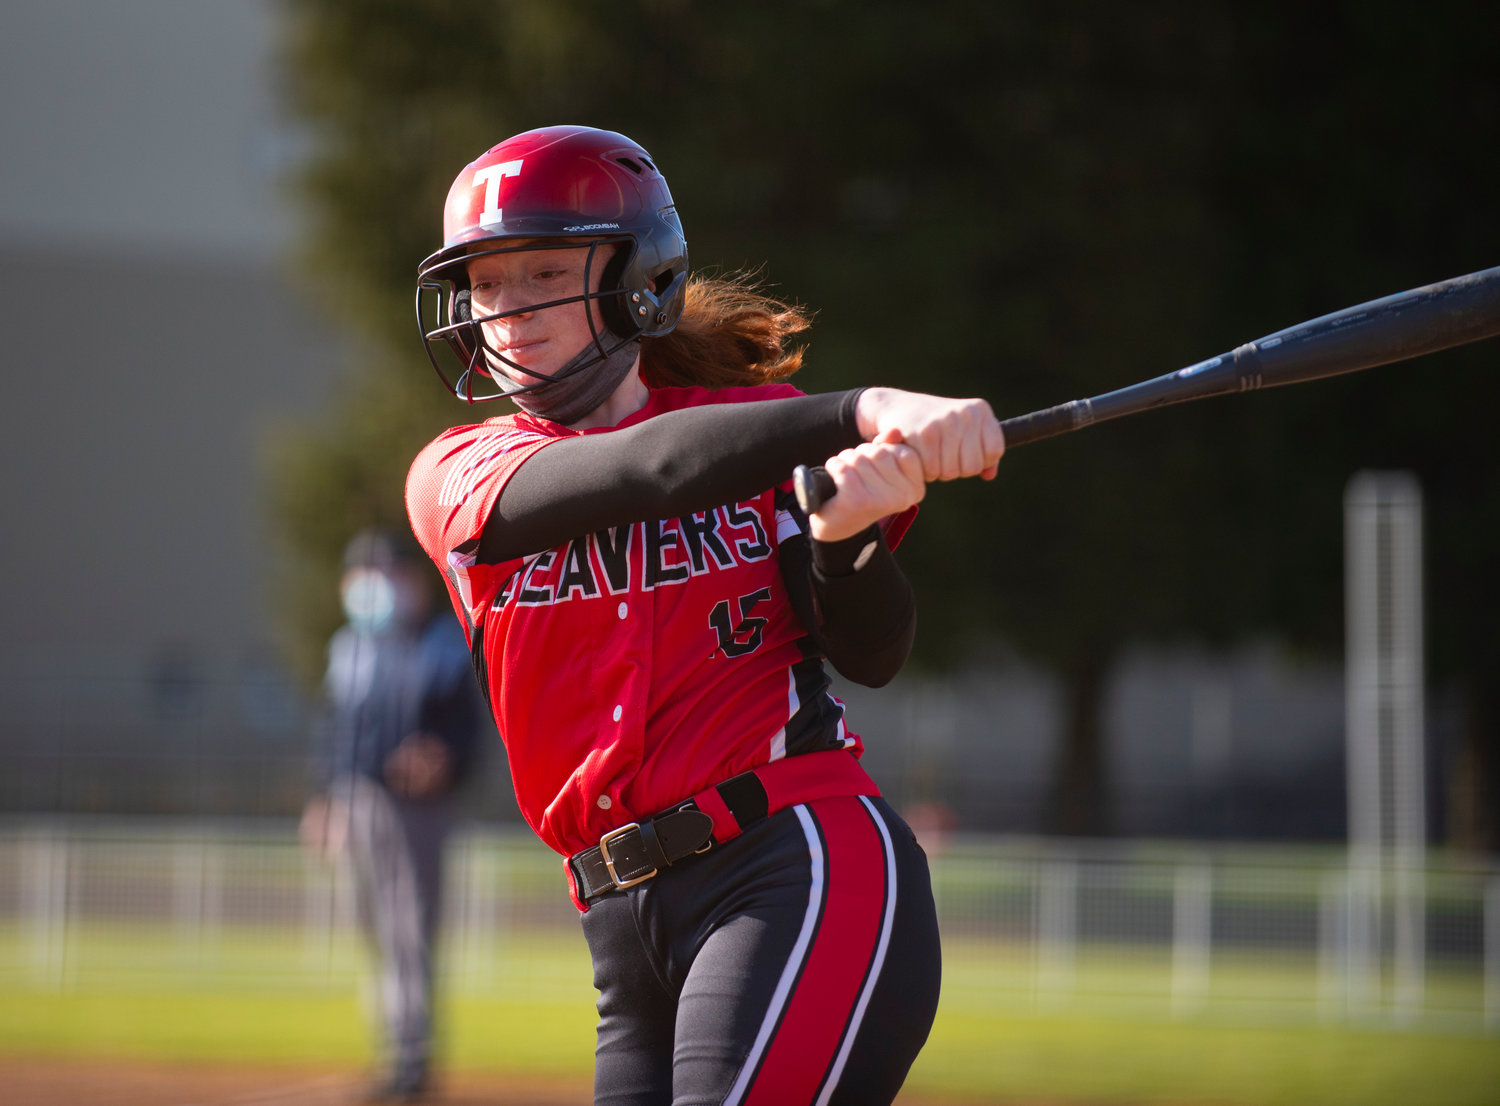 Tenino's Emily Baxter takes a practice swing on Monday against Centralia.